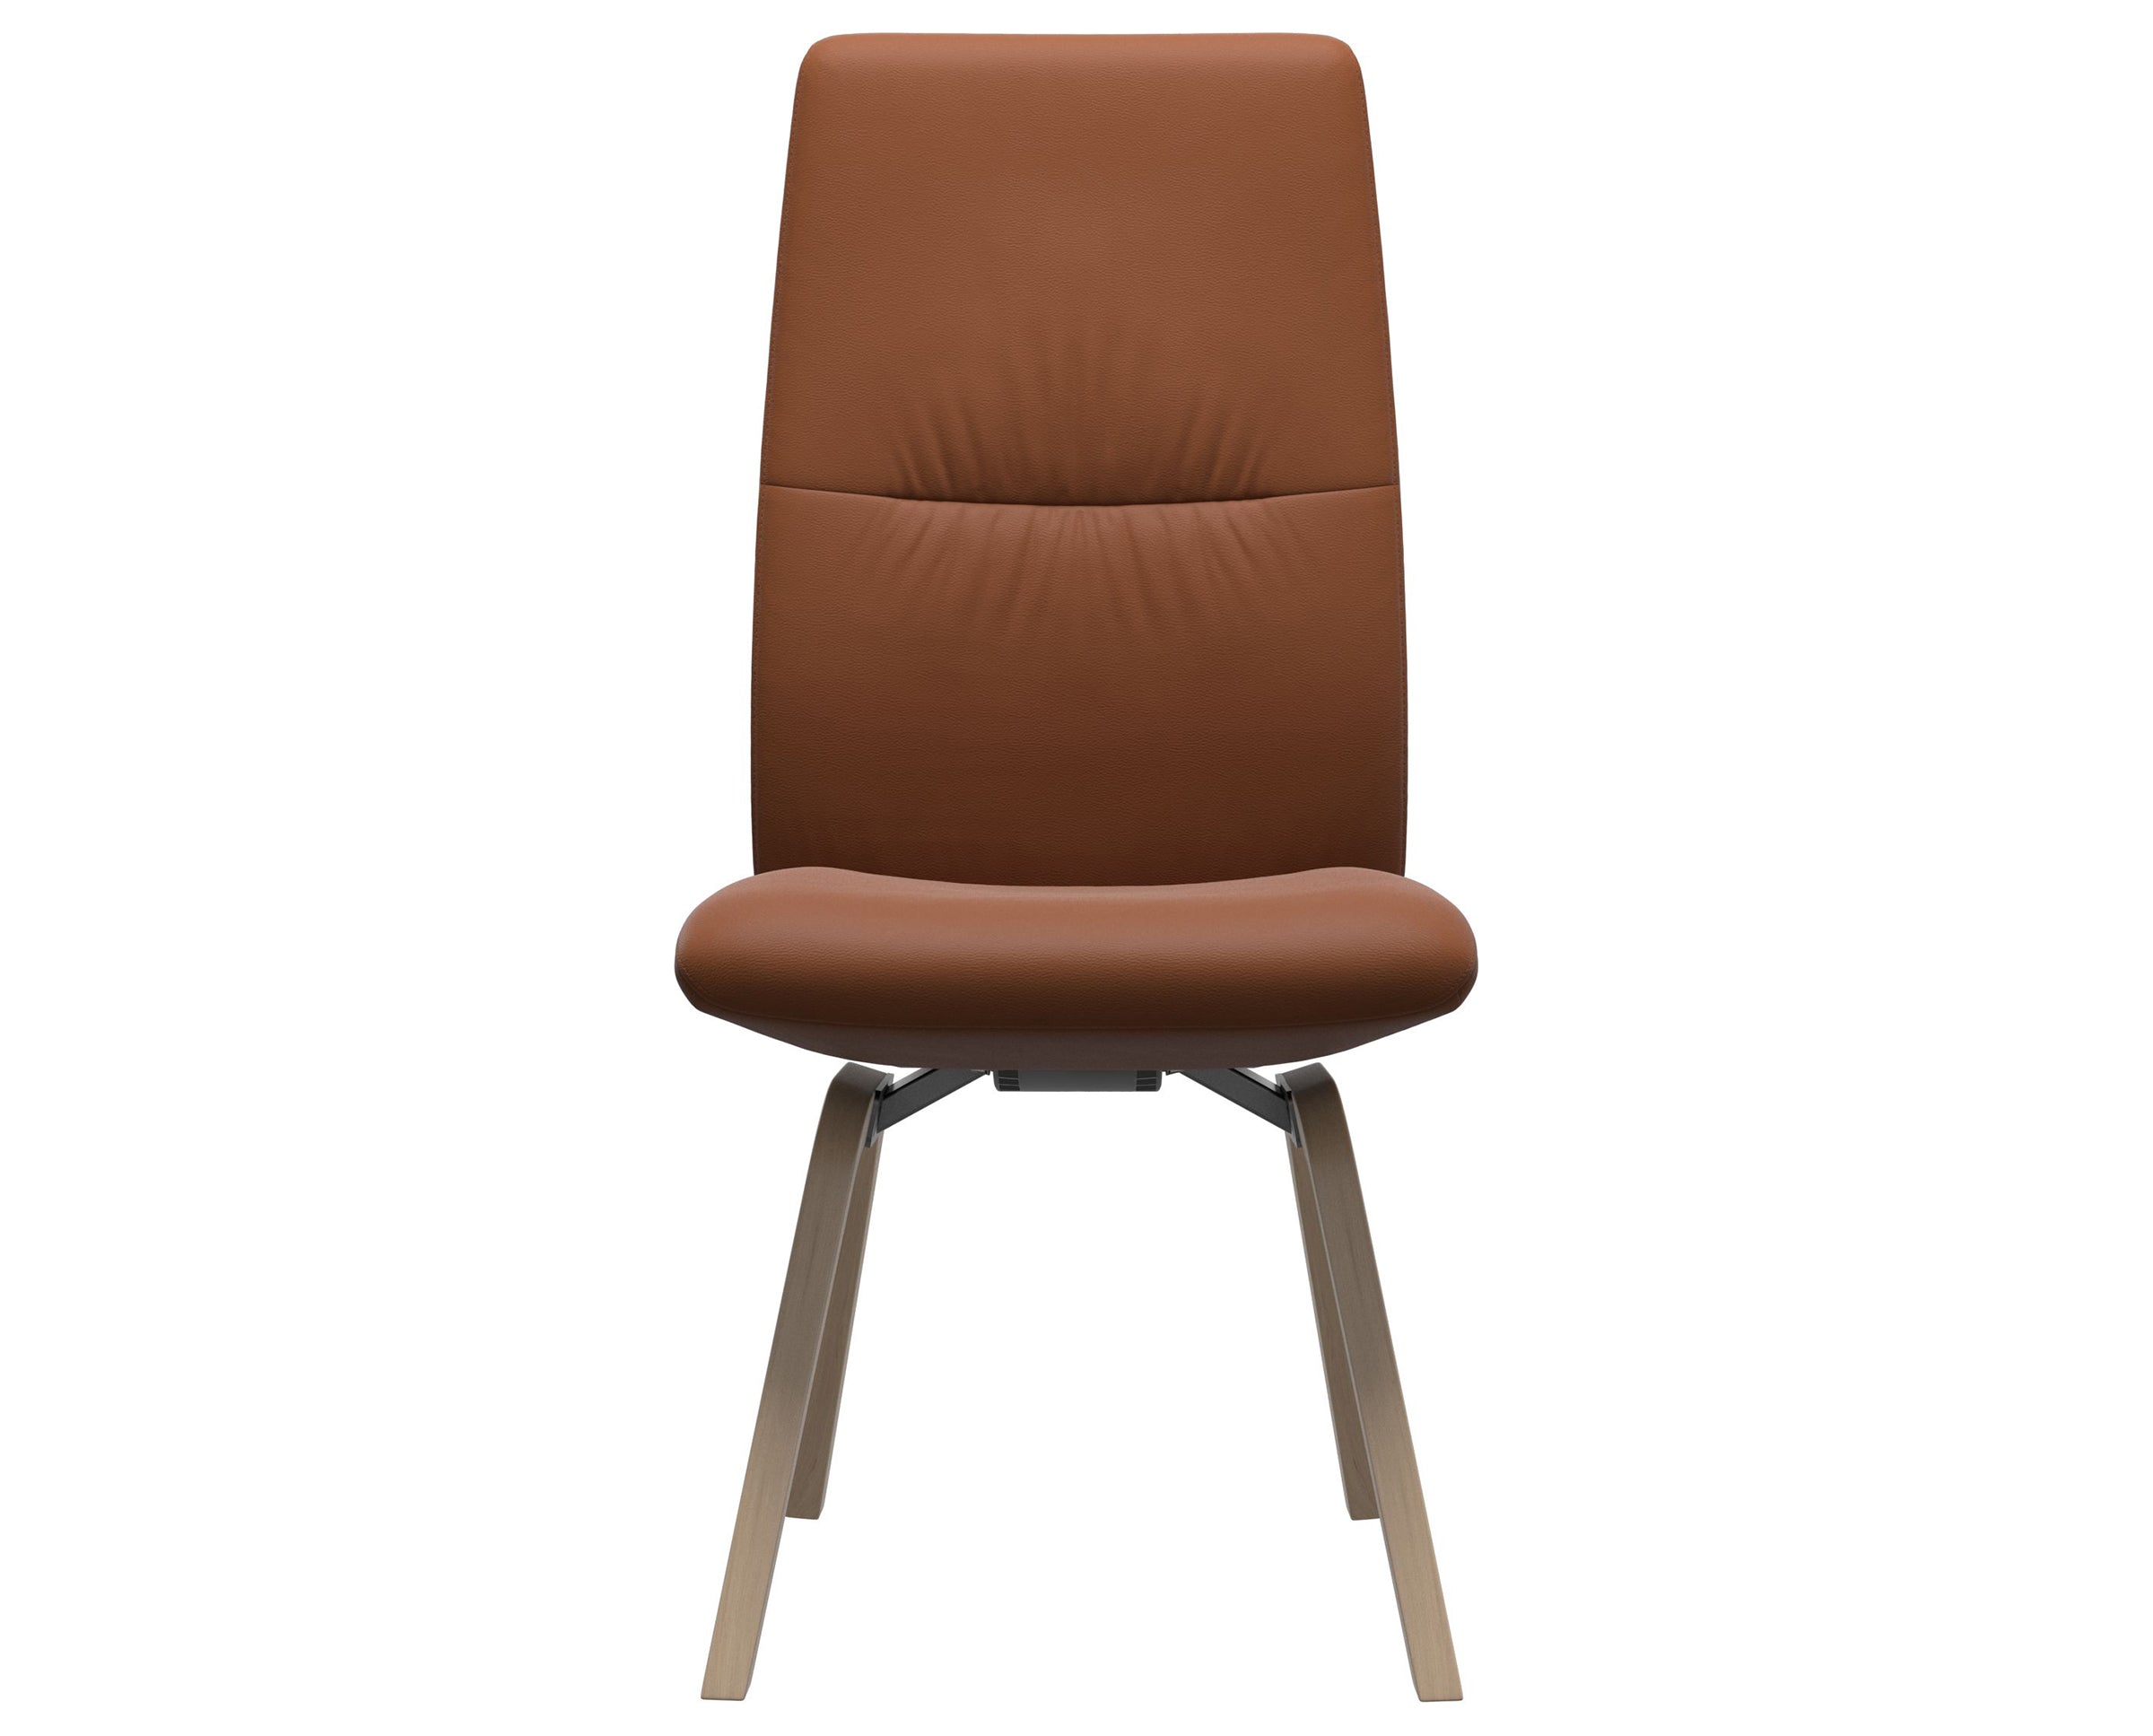 Paloma Leather New Cognac and Natural Base | Stressless Mint High Back D200 Dining Chair | Valley Ridge Furniture